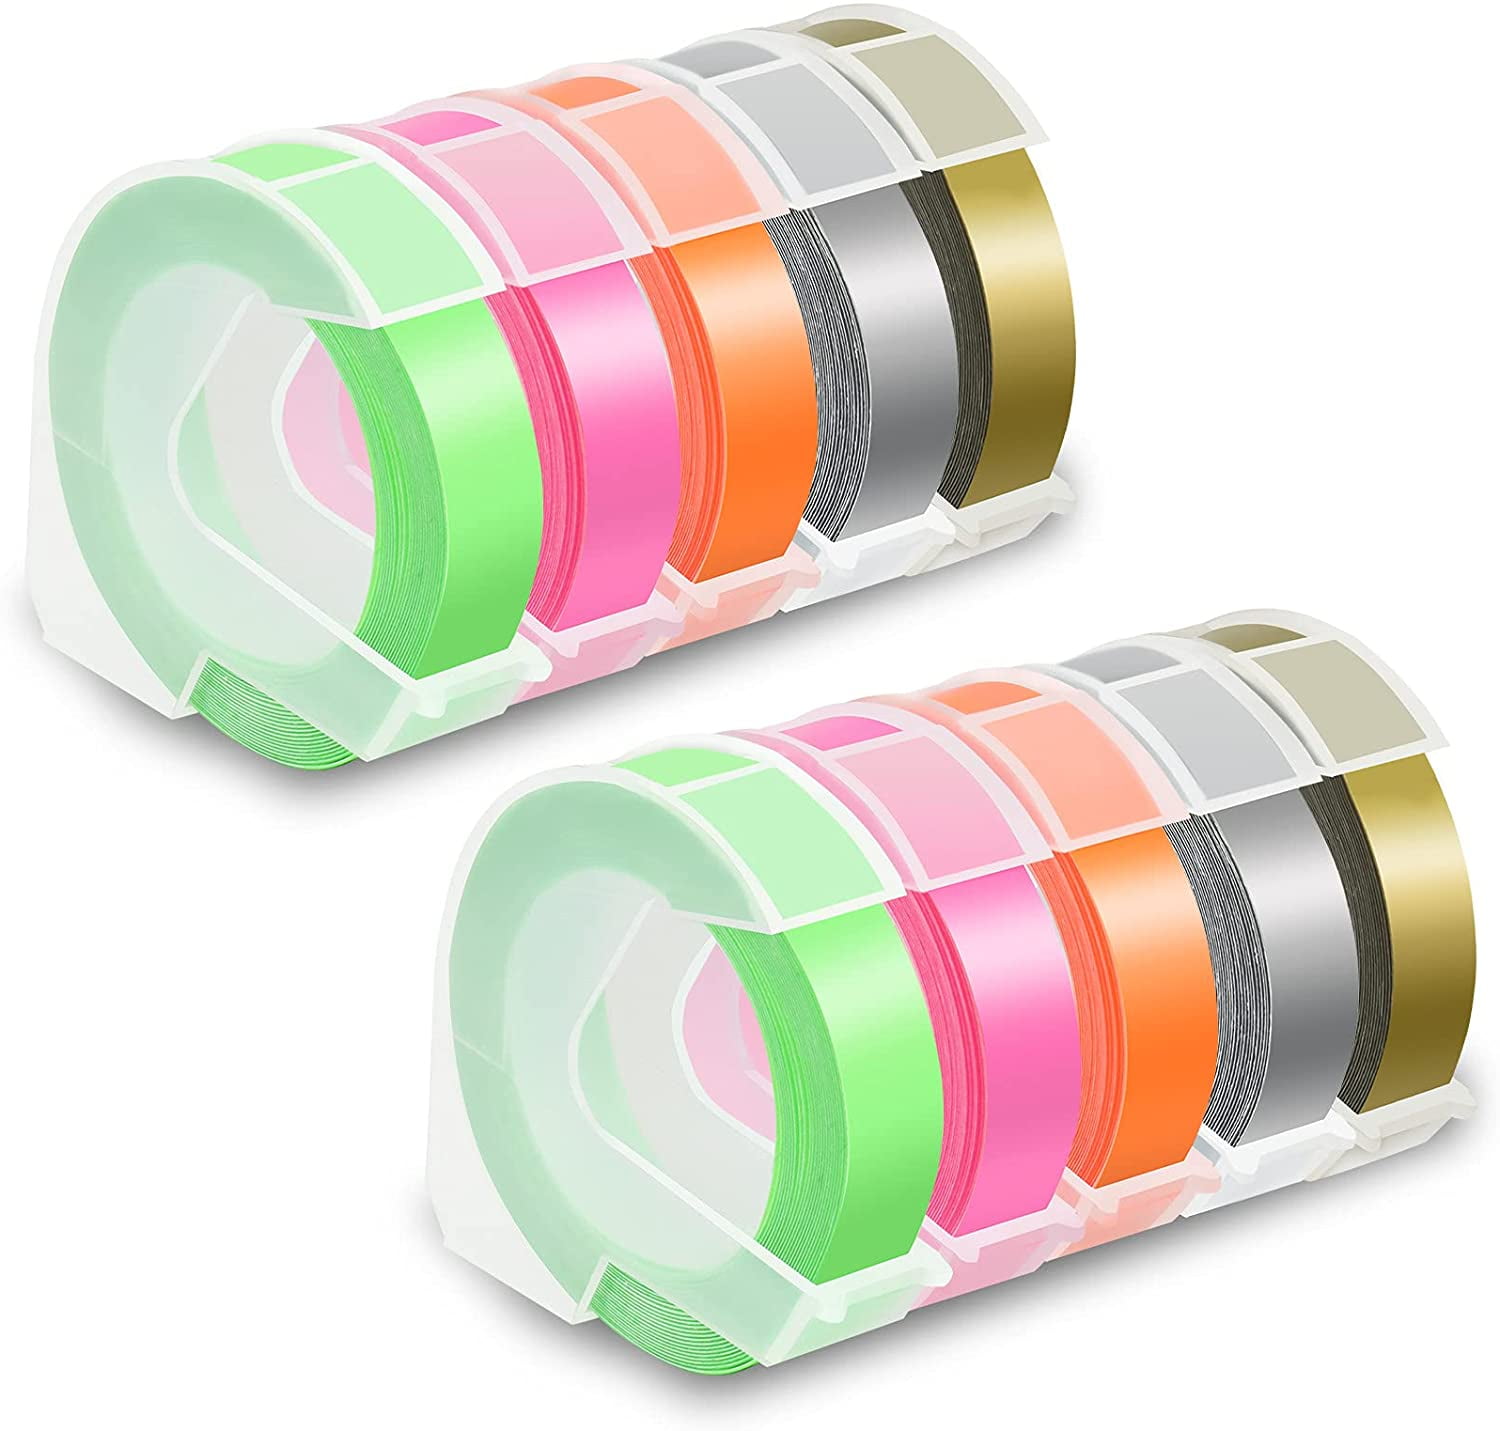 35 Rolls Colorful Label Tape for Dymo 3D 9mm Embossing Label Maker 3/8" x 3m 